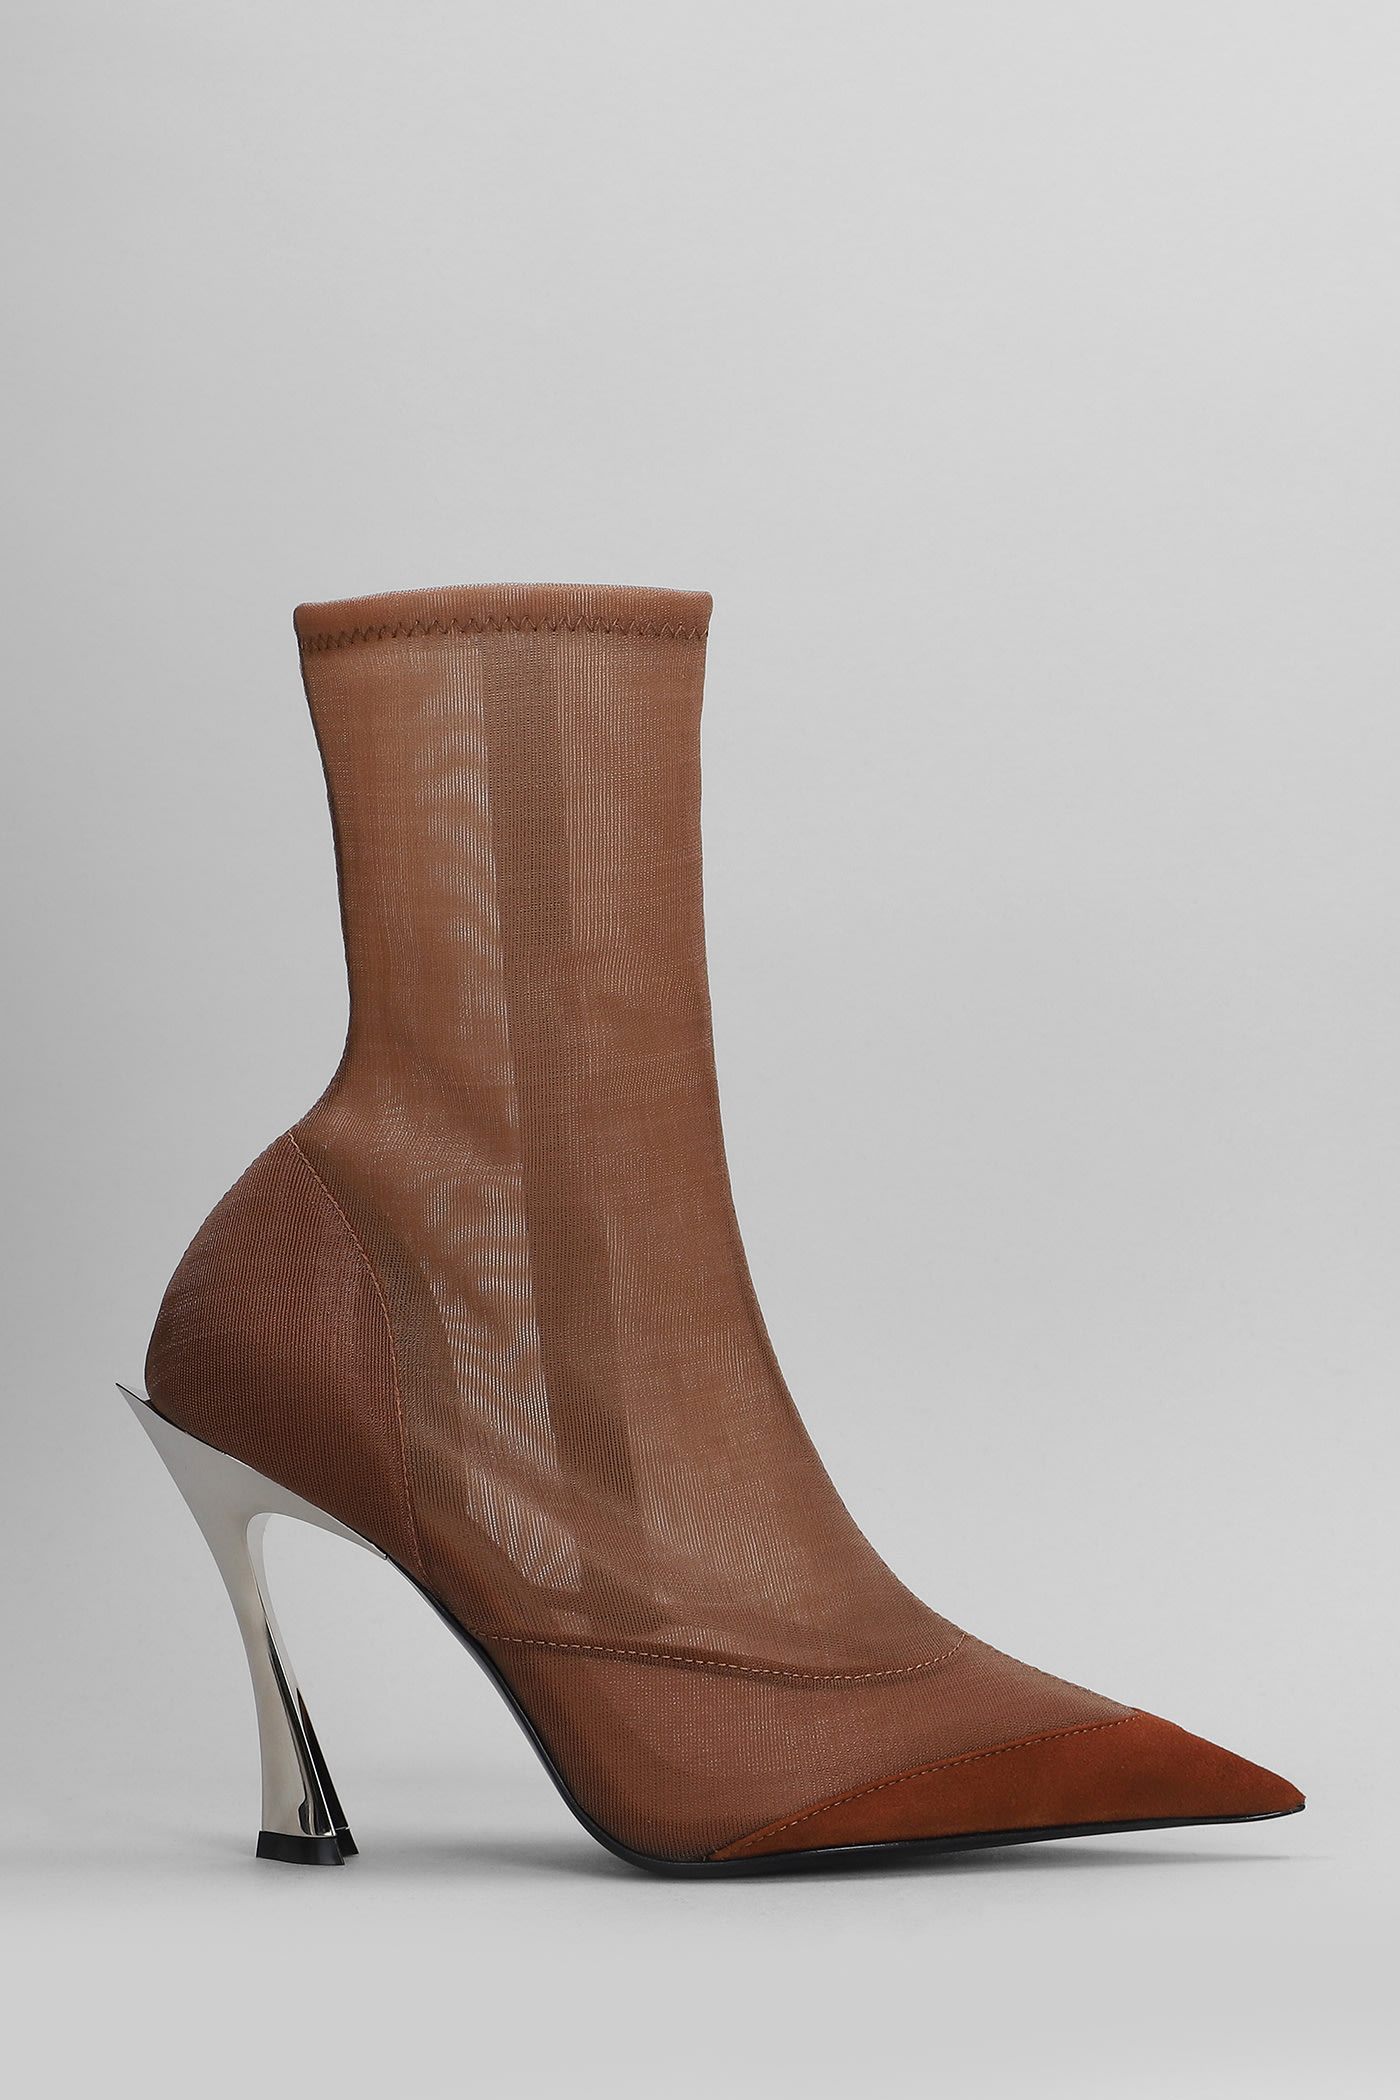 Mugler High Heels Ankle Boots In Leather Color Nylon